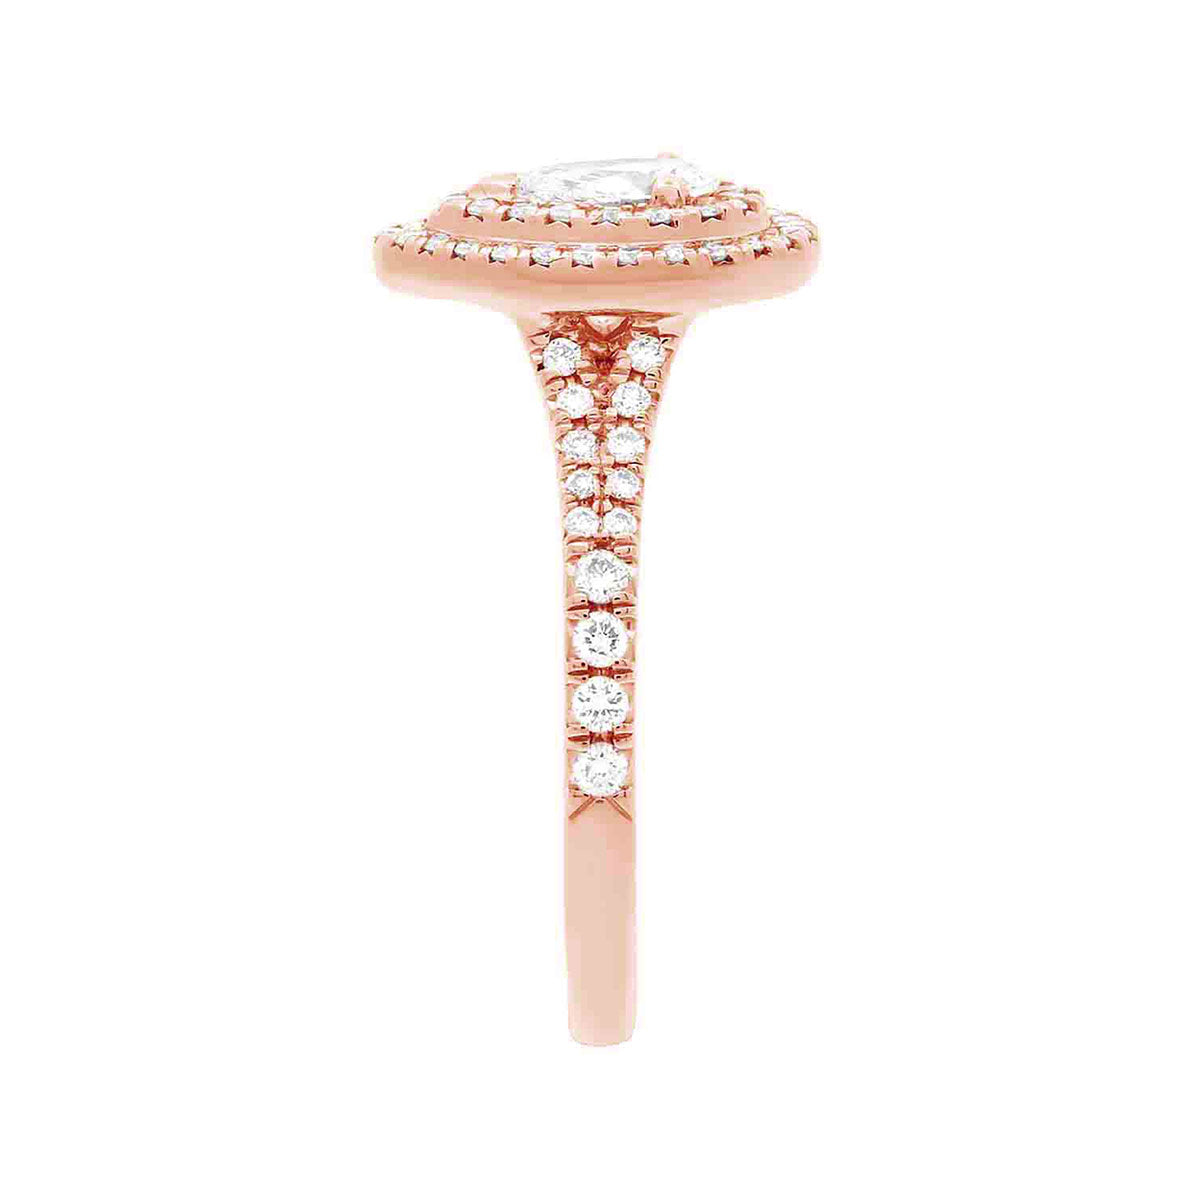 Double Halo Pear Diamond Ring in rose gold in a side view position